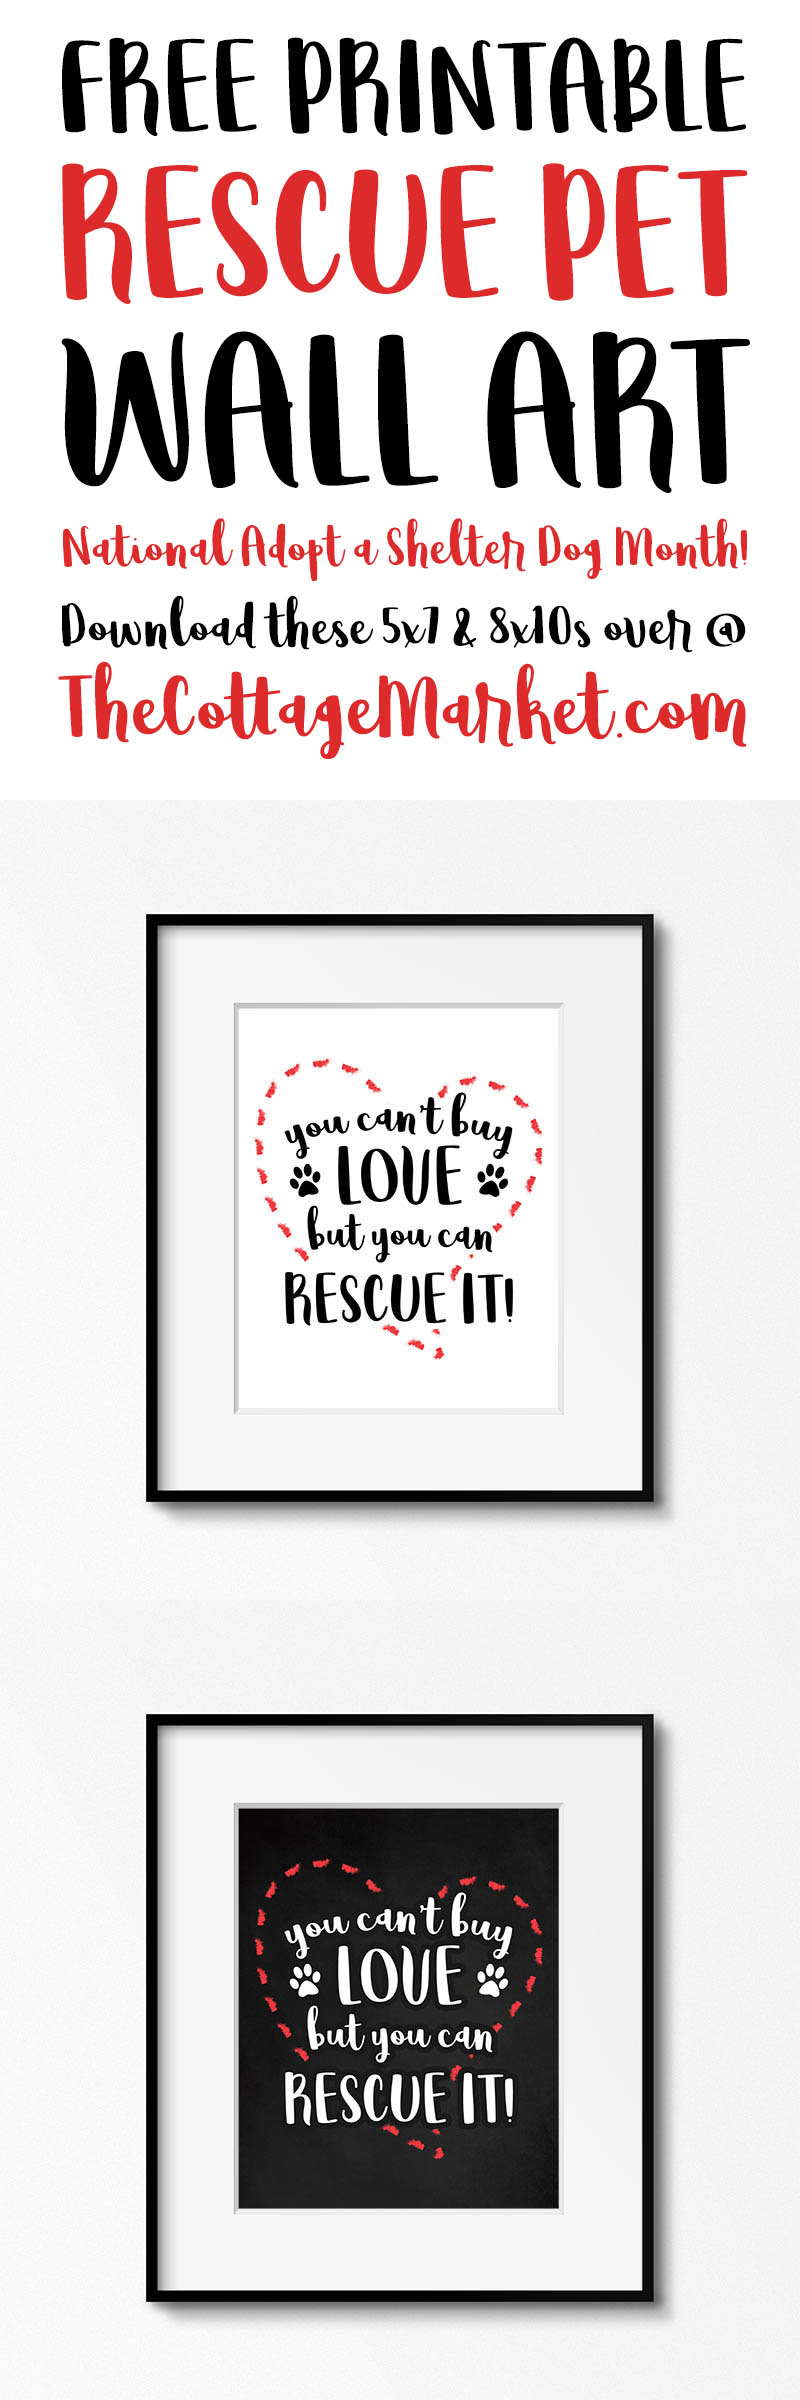 Come and celebrate Adopt A Shelter Dog Month with this new Free Printable Rescue Pet Wall Art!  Spread the word to Adopt Don't Shop and help save li